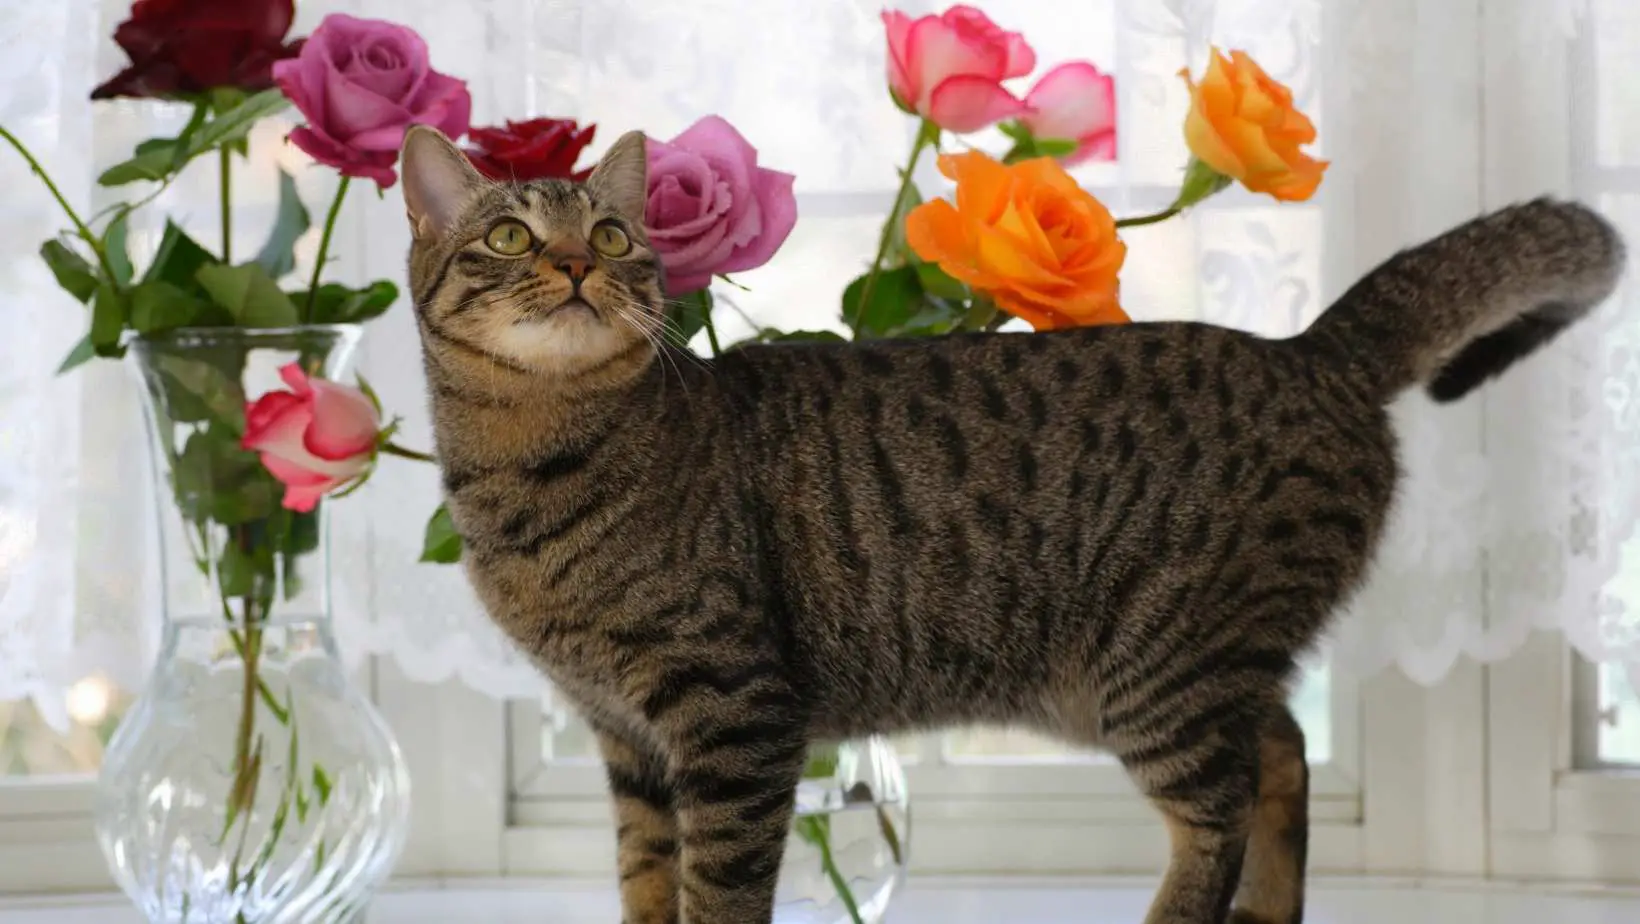 Are Roses Poisonous to Cats?